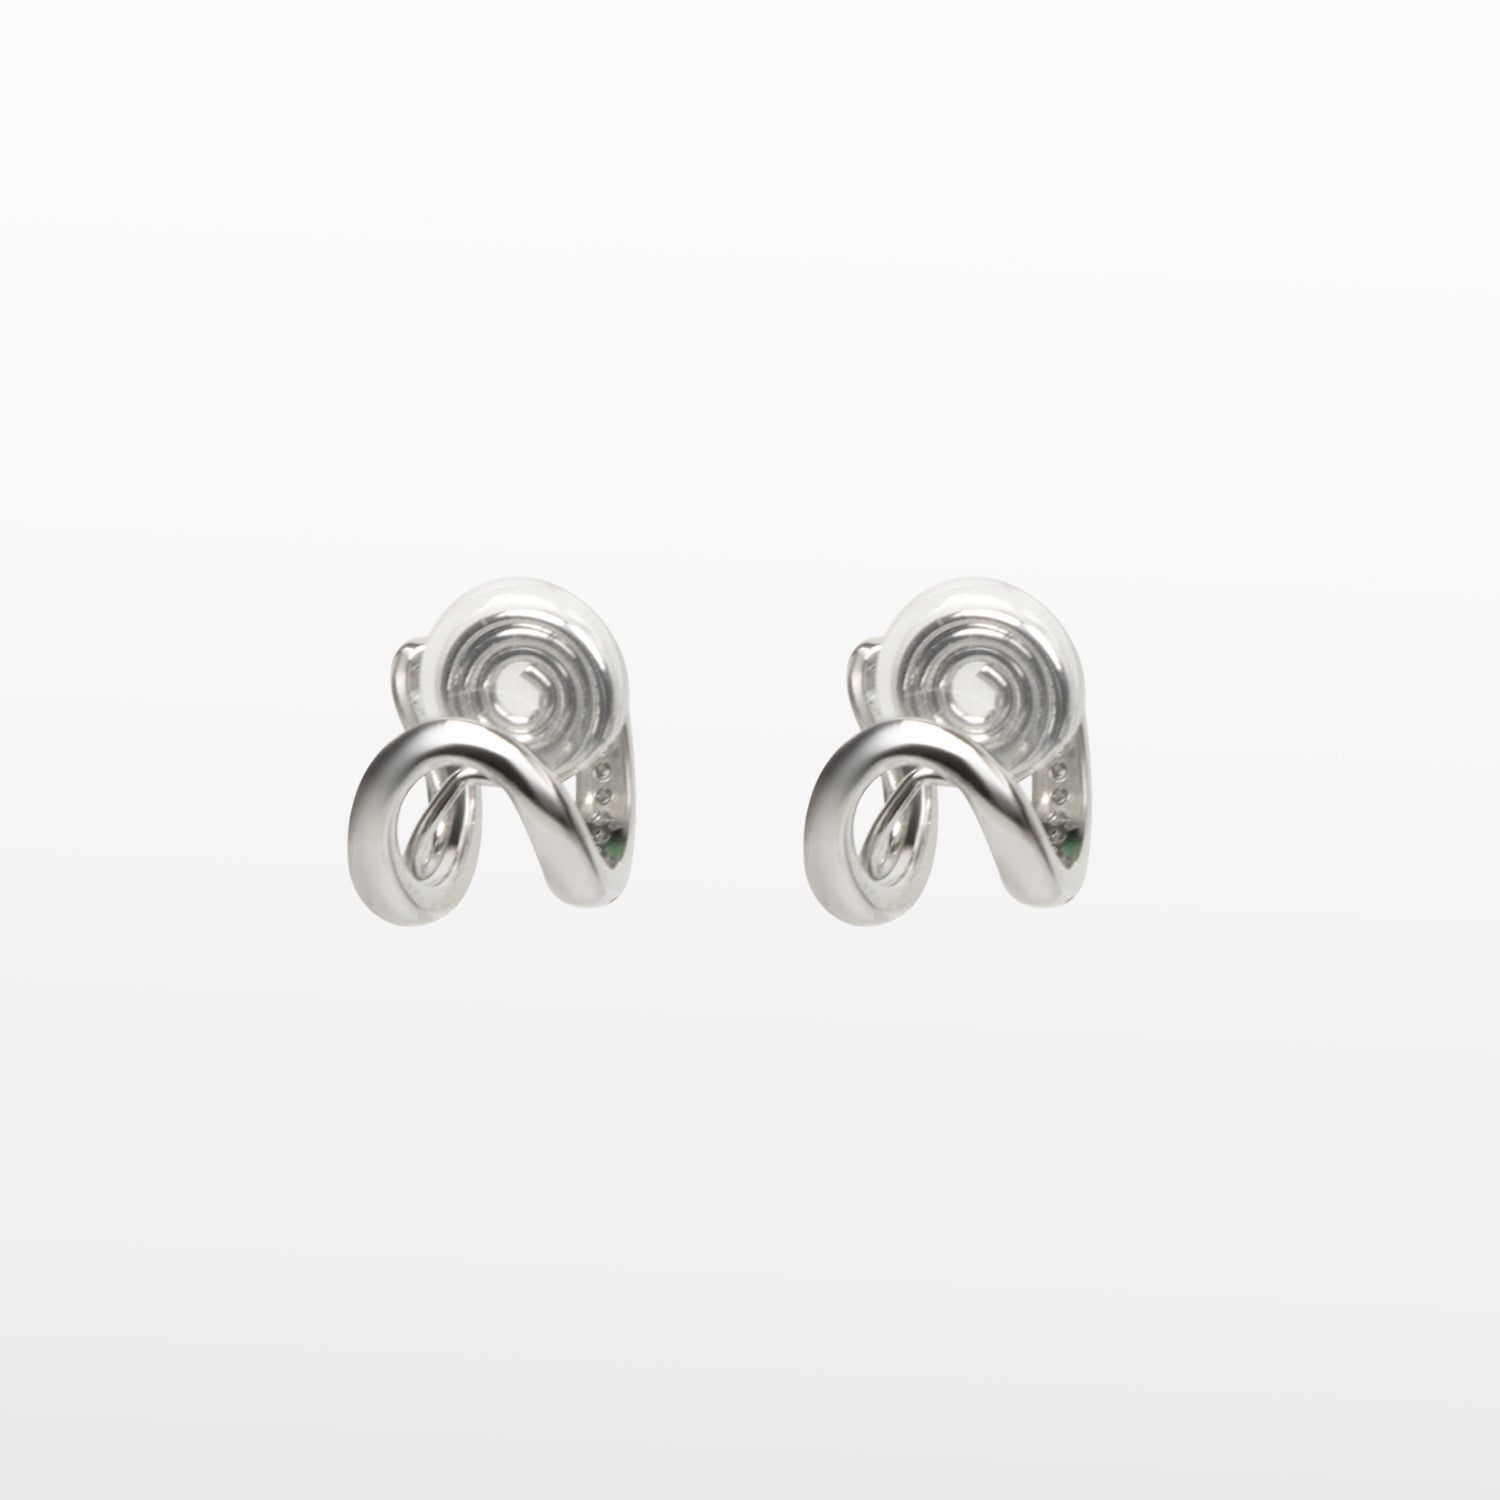 Image of the Double Hoop Pave Clip On Earrings in Silver feature a secure mosquito coil clip-on closure for most ear types. With an easy adjustable design, these earrings can be worn for 24 hours with a comfortable medium hold. Made of sterling silver plated copper with a Cubic Zirconia detail, these earrings are a great addition to any wardrobe.